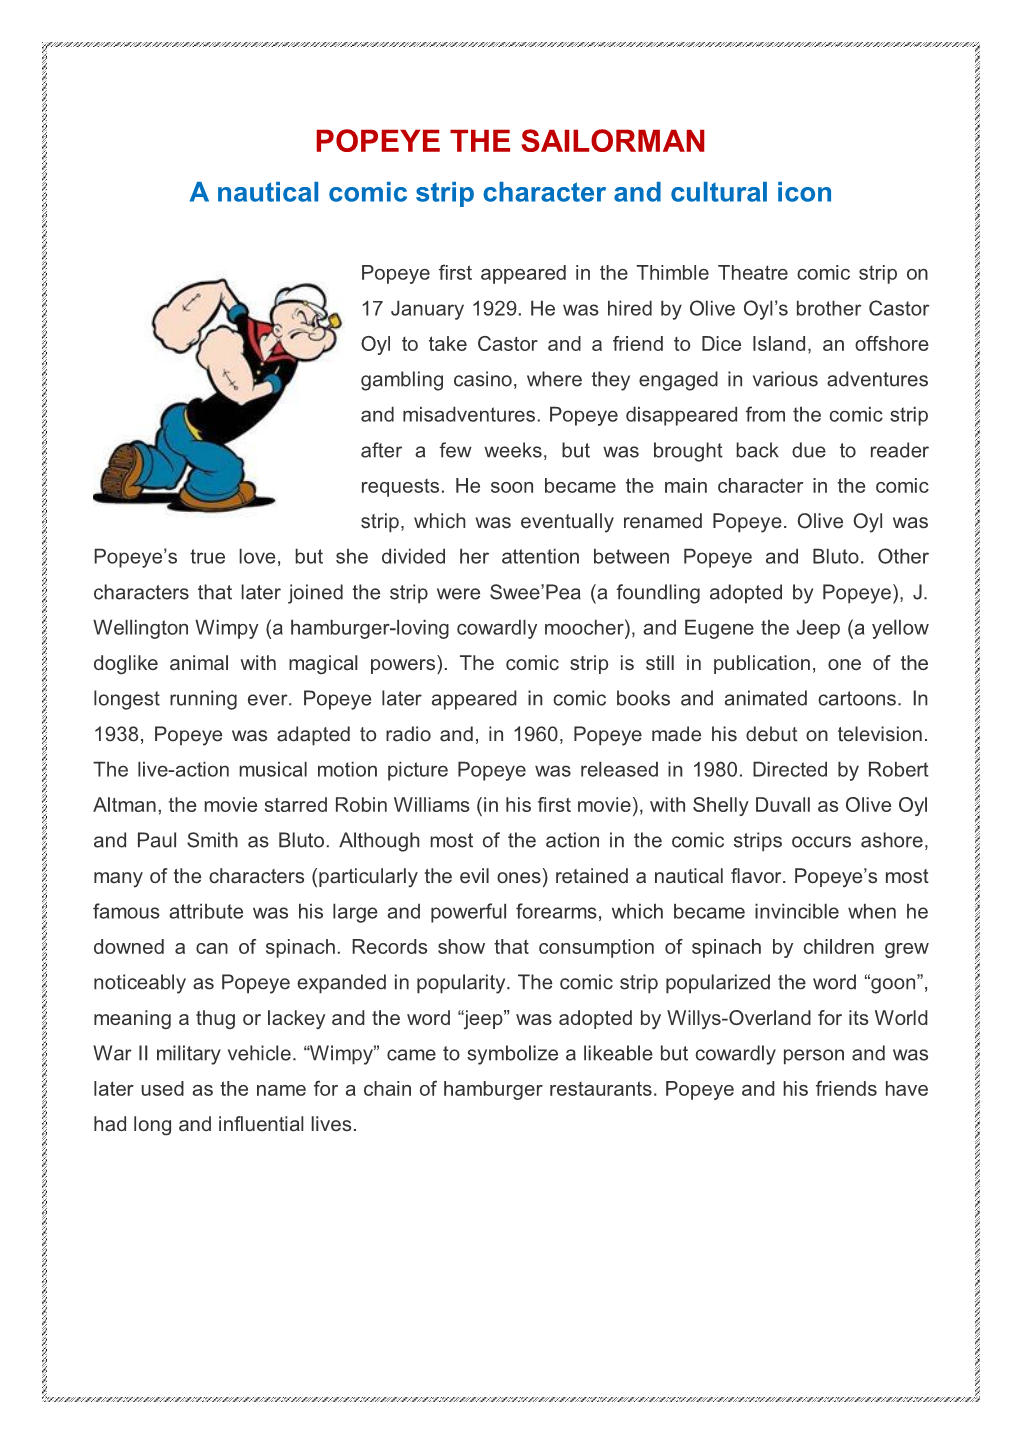 POPEYE the SAILORMAN a Nautical Comic Strip Character and Cultural Icon